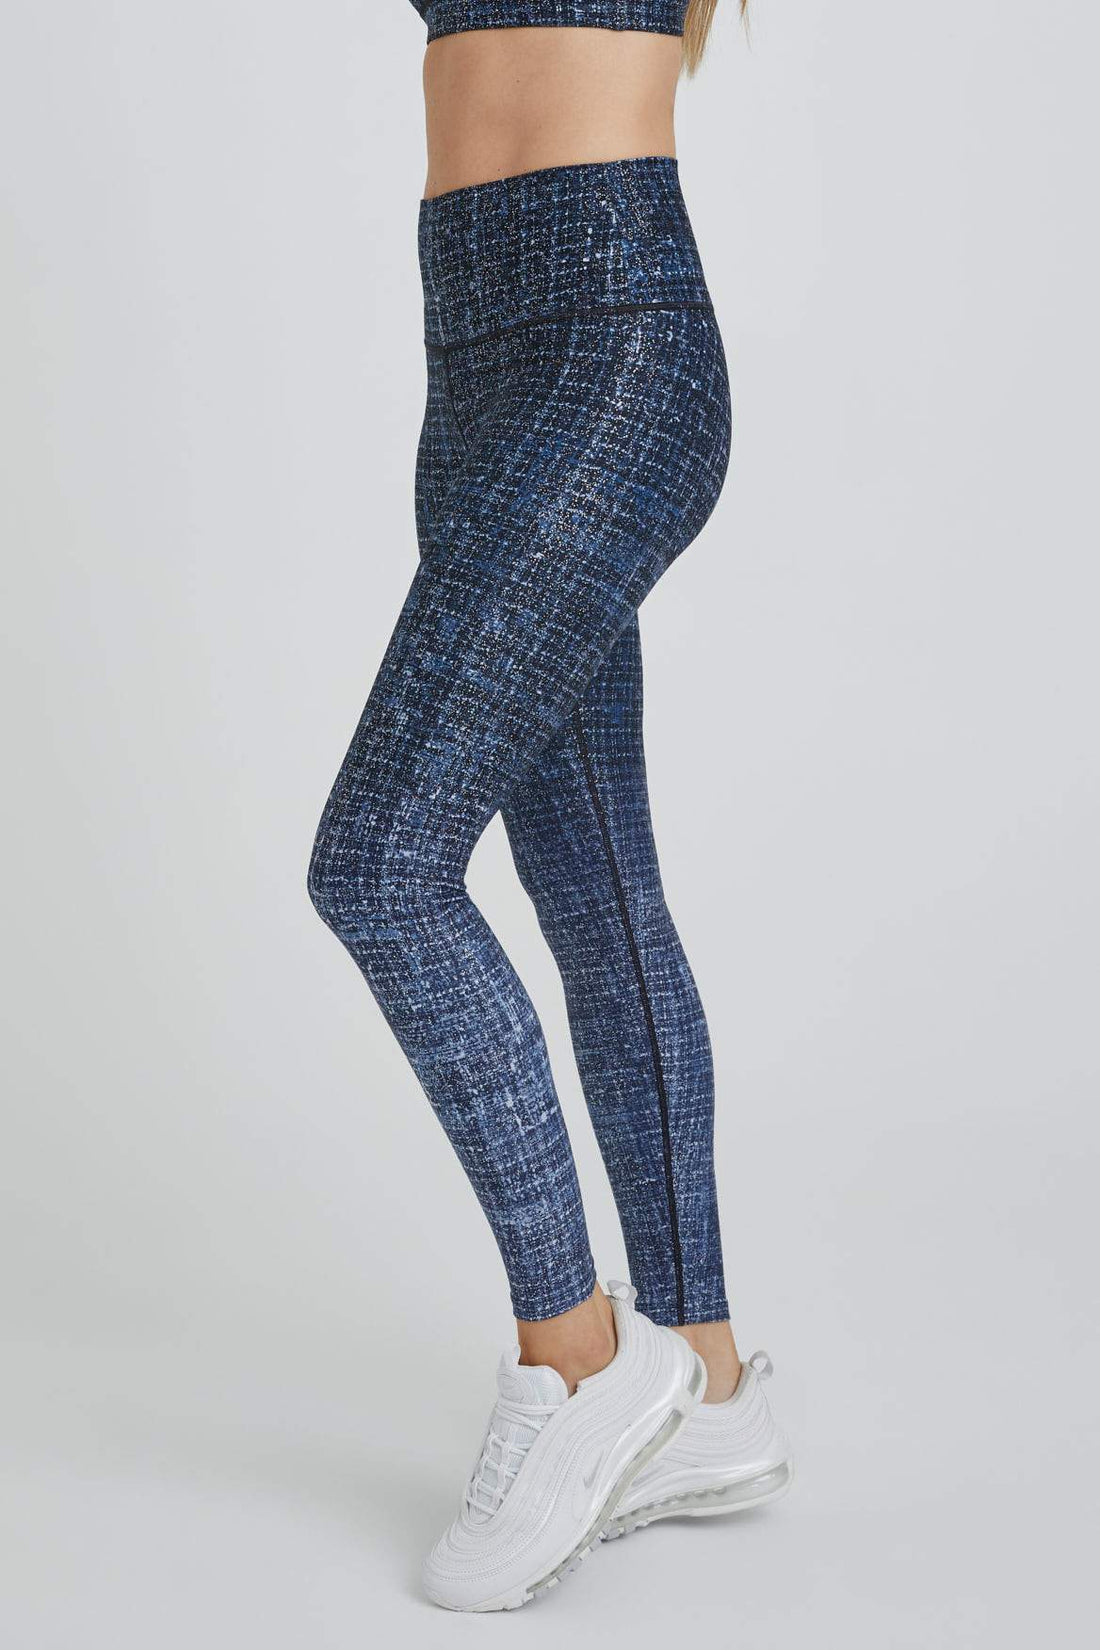 High Waisted Leggings Navy Tweed With Foil – Wear It To Heart